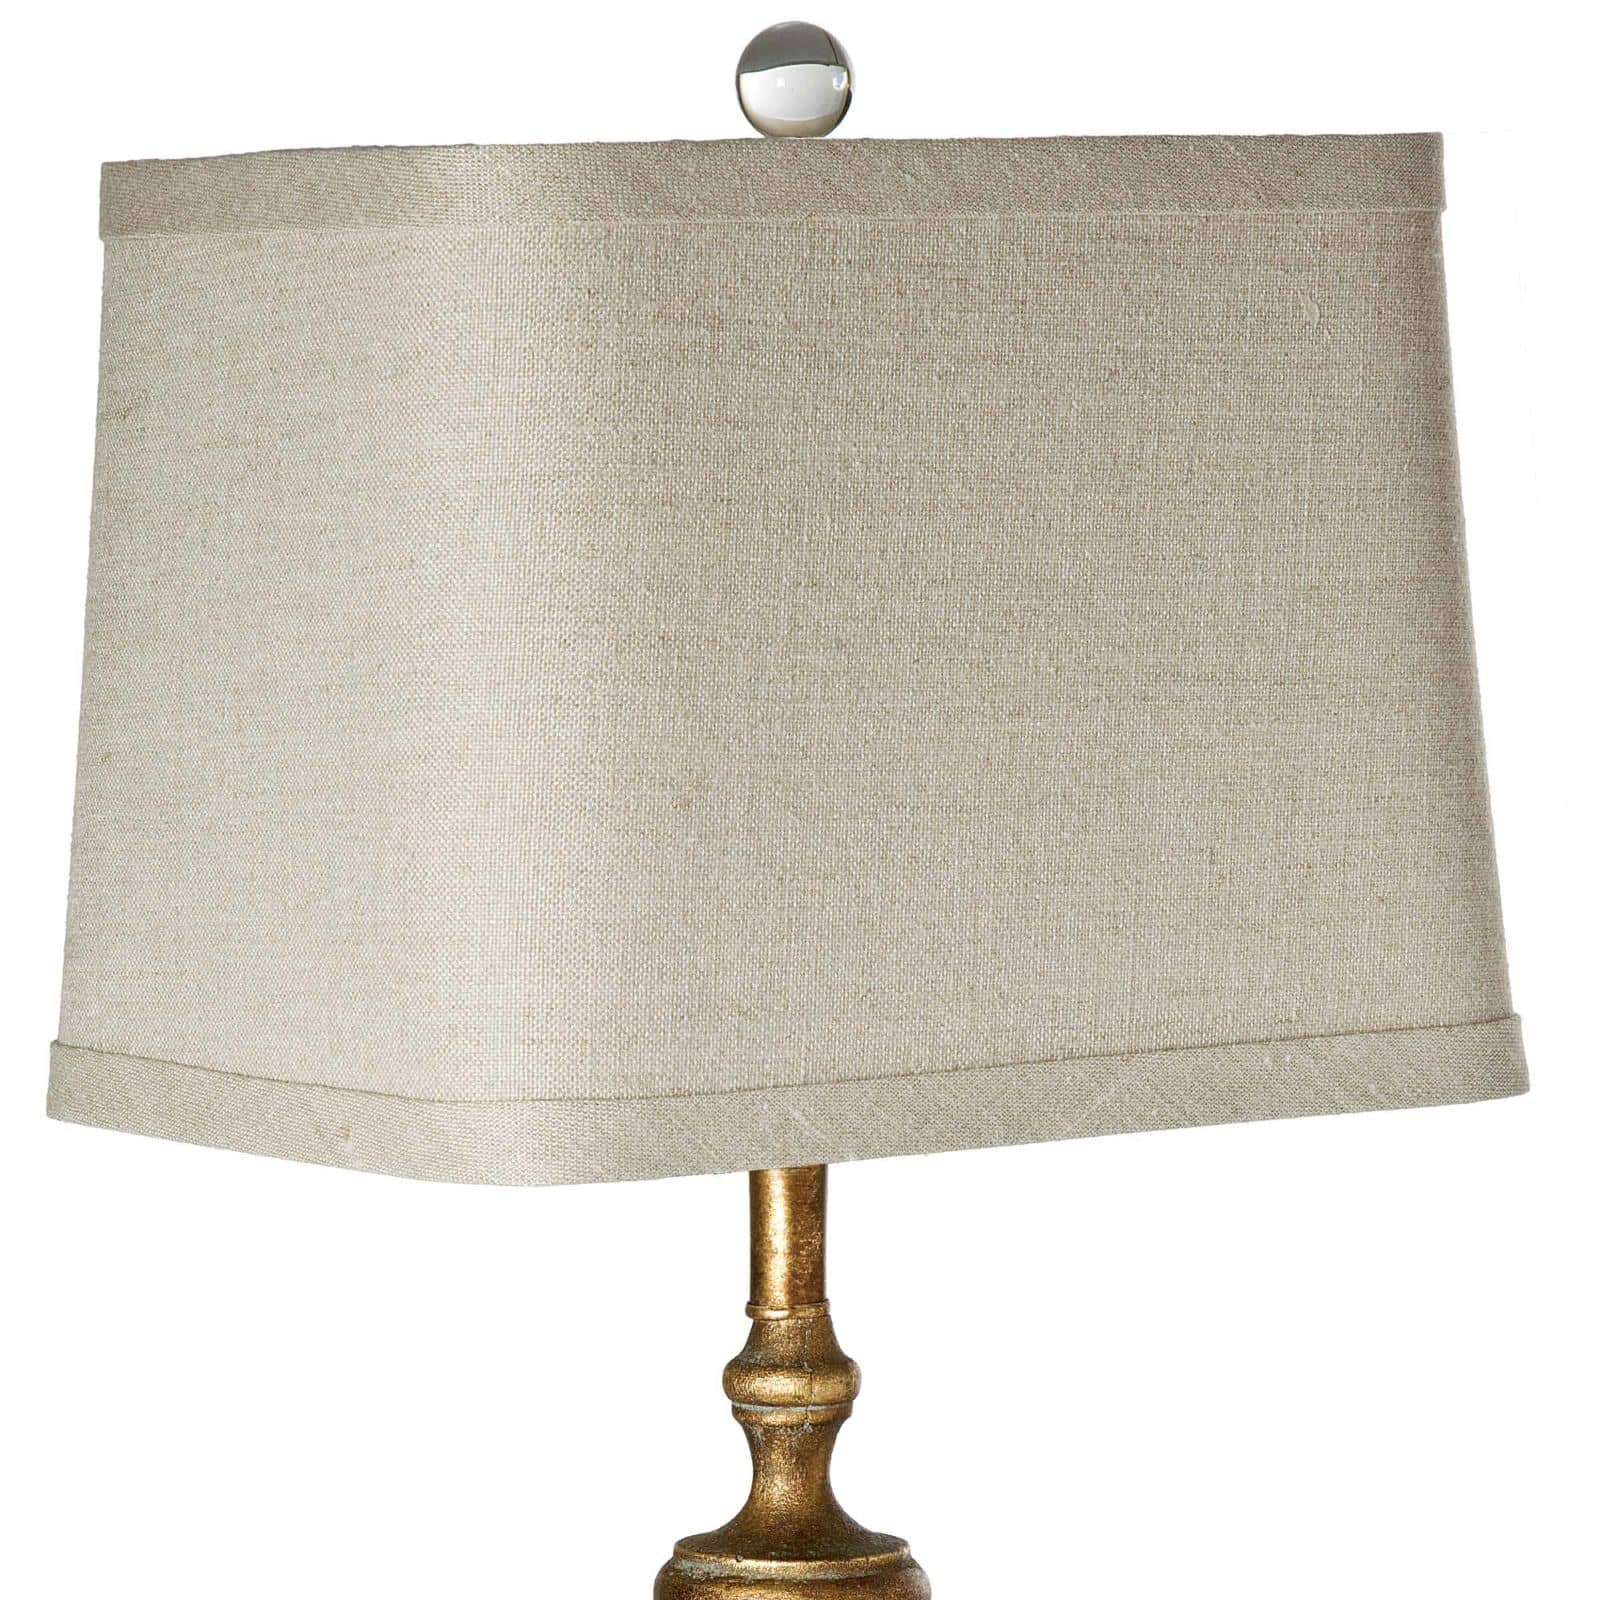 Parisian Glass Table Lamp by Southern Living